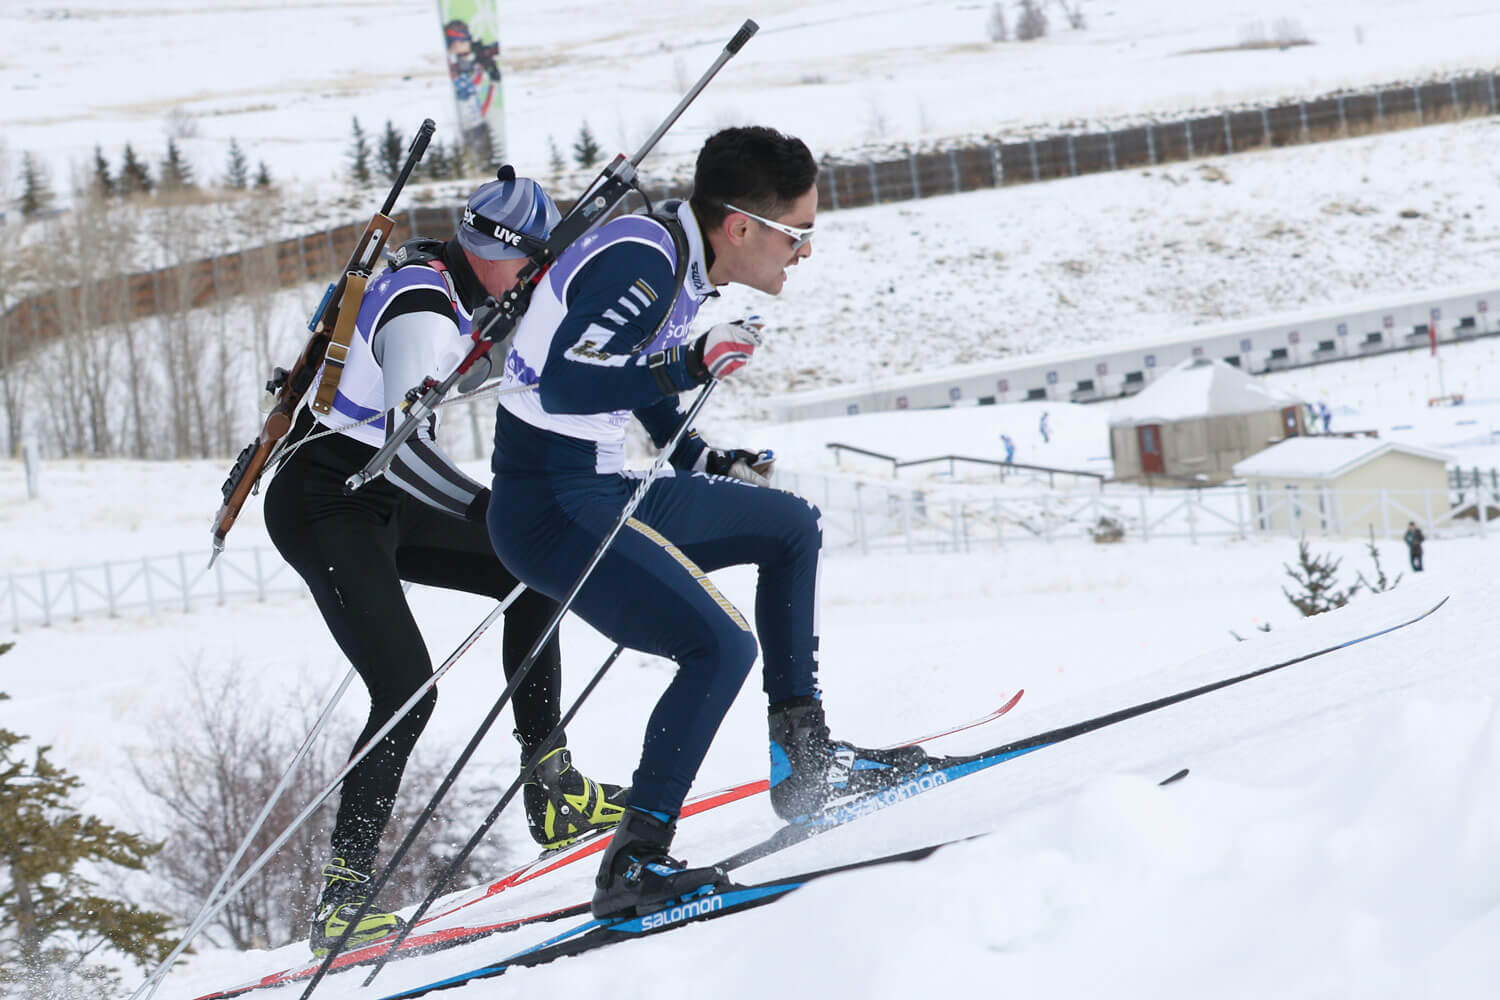 Army National Guard Soldiers compete in the pursuit event of the 2018 Chief National Guard Bureau Biathlon Championships. The competition, which takes place at the Olympic course at Soldier Hollow, Utah, includes 12.5 km of cross-country skiing for men and 10 km for women. Competitors must also engage targets at the precision rifle marksmanship range in the prone and offhand firing positions. U.S. Army photo by SGT Nathaniel Free